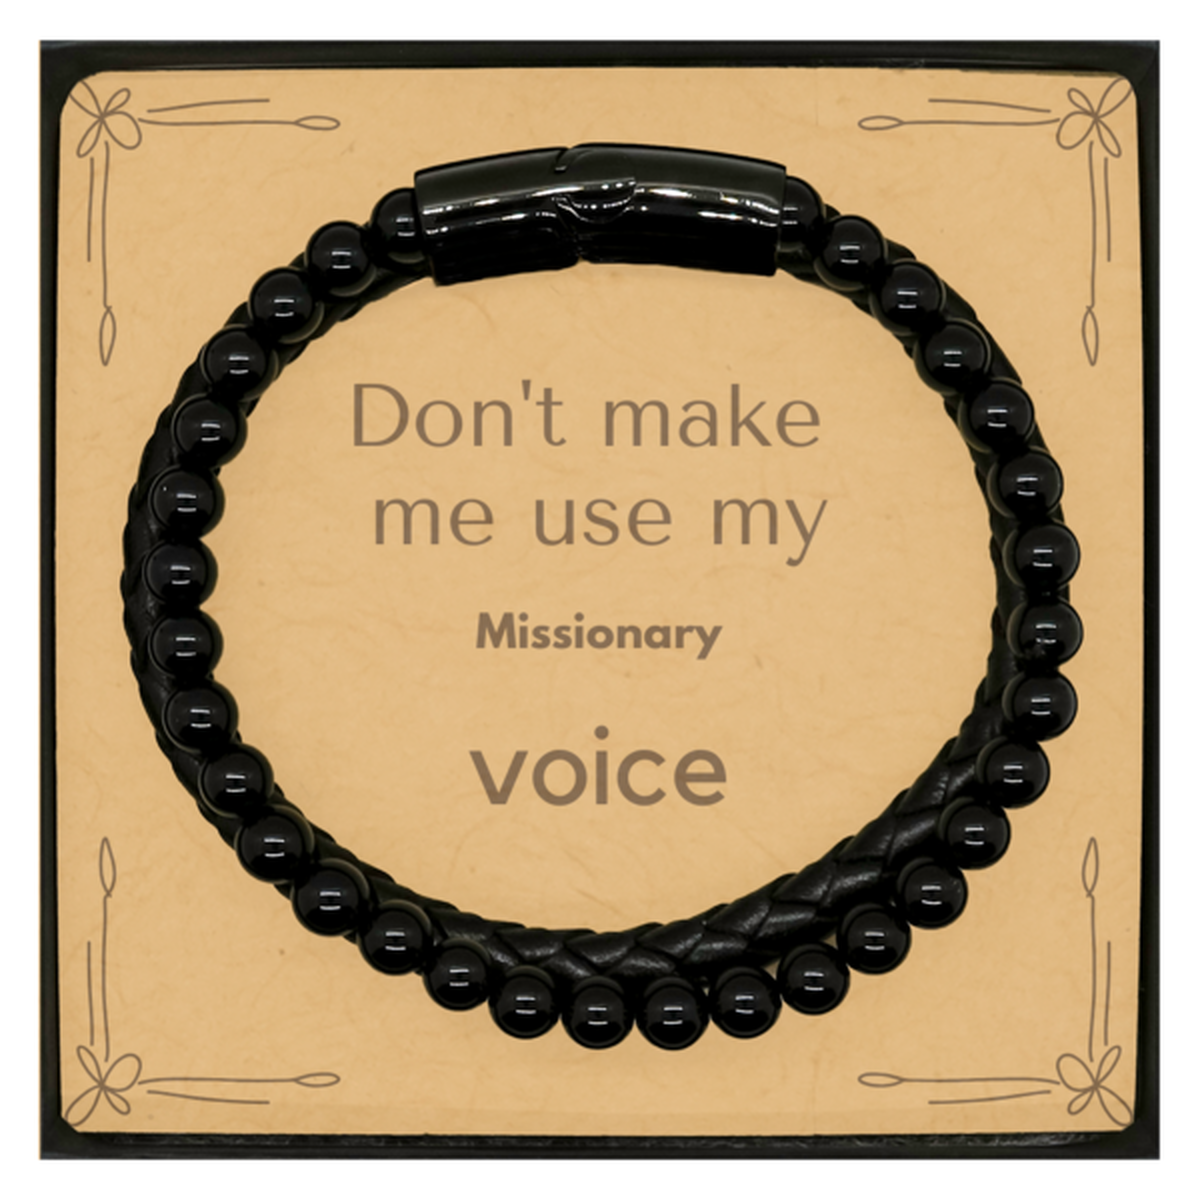 Don't make me use my Missionary voice, Sarcasm Missionary Card Gifts, Christmas Missionary Stone Leather Bracelets Birthday Unique Gifts For Missionary Coworkers, Men, Women, Colleague, Friends